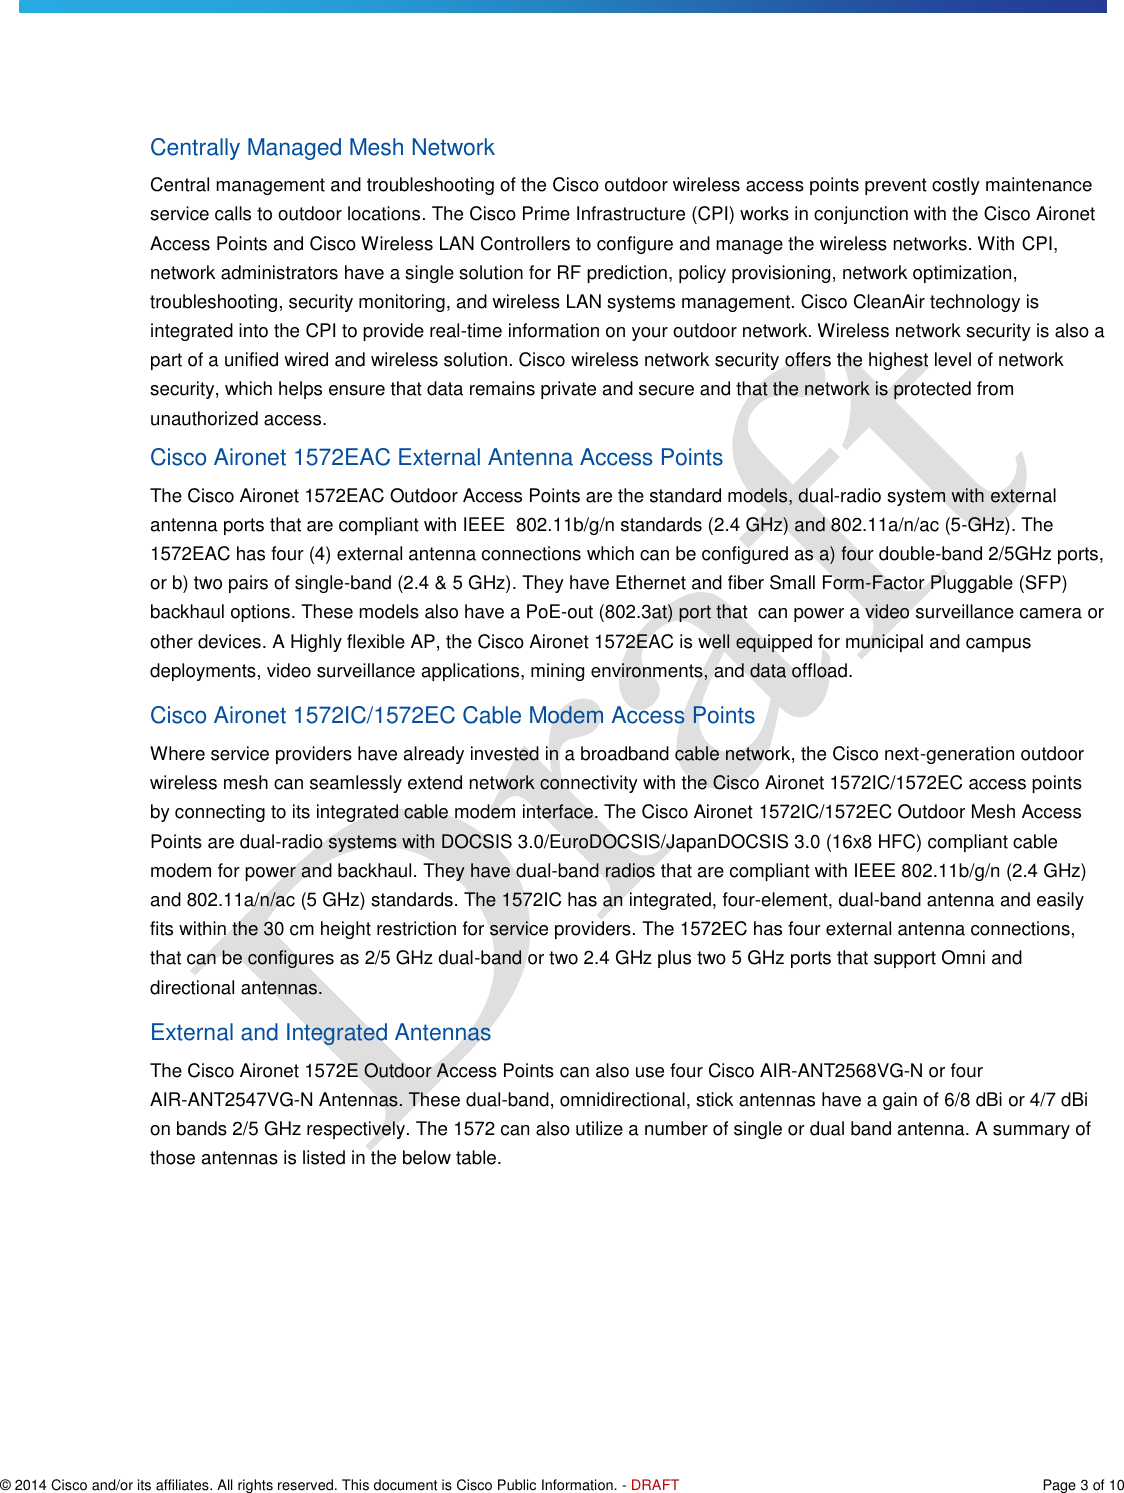   © 2014 Cisco and/or its affiliates. All rights reserved. This document is Cisco Public Information. - DRAFT  Page 3 of 10 Centrally Managed Mesh Network Central management and troubleshooting of the Cisco outdoor wireless access points prevent costly maintenance service calls to outdoor locations. The Cisco Prime Infrastructure (CPI) works in conjunction with the Cisco Aironet Access Points and Cisco Wireless LAN Controllers to configure and manage the wireless networks. With CPI, network administrators have a single solution for RF prediction, policy provisioning, network optimization, troubleshooting, security monitoring, and wireless LAN systems management. Cisco CleanAir technology is integrated into the CPI to provide real-time information on your outdoor network. Wireless network security is also a part of a unified wired and wireless solution. Cisco wireless network security offers the highest level of network security, which helps ensure that data remains private and secure and that the network is protected from unauthorized access. Cisco Aironet 1572EAC External Antenna Access Points The Cisco Aironet 1572EAC Outdoor Access Points are the standard models, dual-radio system with external antenna ports that are compliant with IEEE  802.11b/g/n standards (2.4 GHz) and 802.11a/n/ac (5-GHz). The 1572EAC has four (4) external antenna connections which can be configured as a) four double-band 2/5GHz ports, or b) two pairs of single-band (2.4 &amp; 5 GHz). They have Ethernet and fiber Small Form-Factor Pluggable (SFP) backhaul options. These models also have a PoE-out (802.3at) port that  can power a video surveillance camera or other devices. A Highly flexible AP, the Cisco Aironet 1572EAC is well equipped for municipal and campus deployments, video surveillance applications, mining environments, and data offload. Cisco Aironet 1572IC/1572EC Cable Modem Access Points Where service providers have already invested in a broadband cable network, the Cisco next-generation outdoor wireless mesh can seamlessly extend network connectivity with the Cisco Aironet 1572IC/1572EC access points by connecting to its integrated cable modem interface. The Cisco Aironet 1572IC/1572EC Outdoor Mesh Access Points are dual-radio systems with DOCSIS 3.0/EuroDOCSIS/JapanDOCSIS 3.0 (16x8 HFC) compliant cable modem for power and backhaul. They have dual-band radios that are compliant with IEEE 802.11b/g/n (2.4 GHz) and 802.11a/n/ac (5 GHz) standards. The 1572IC has an integrated, four-element, dual-band antenna and easily fits within the 30 cm height restriction for service providers. The 1572EC has four external antenna connections, that can be configures as 2/5 GHz dual-band or two 2.4 GHz plus two 5 GHz ports that support Omni and directional antennas.  External and Integrated Antennas The Cisco Aironet 1572E Outdoor Access Points can also use four Cisco AIR-ANT2568VG-N or four AIR-ANT2547VG-N Antennas. These dual-band, omnidirectional, stick antennas have a gain of 6/8 dBi or 4/7 dBi on bands 2/5 GHz respectively. The 1572 can also utilize a number of single or dual band antenna. A summary of those antennas is listed in the below table. 